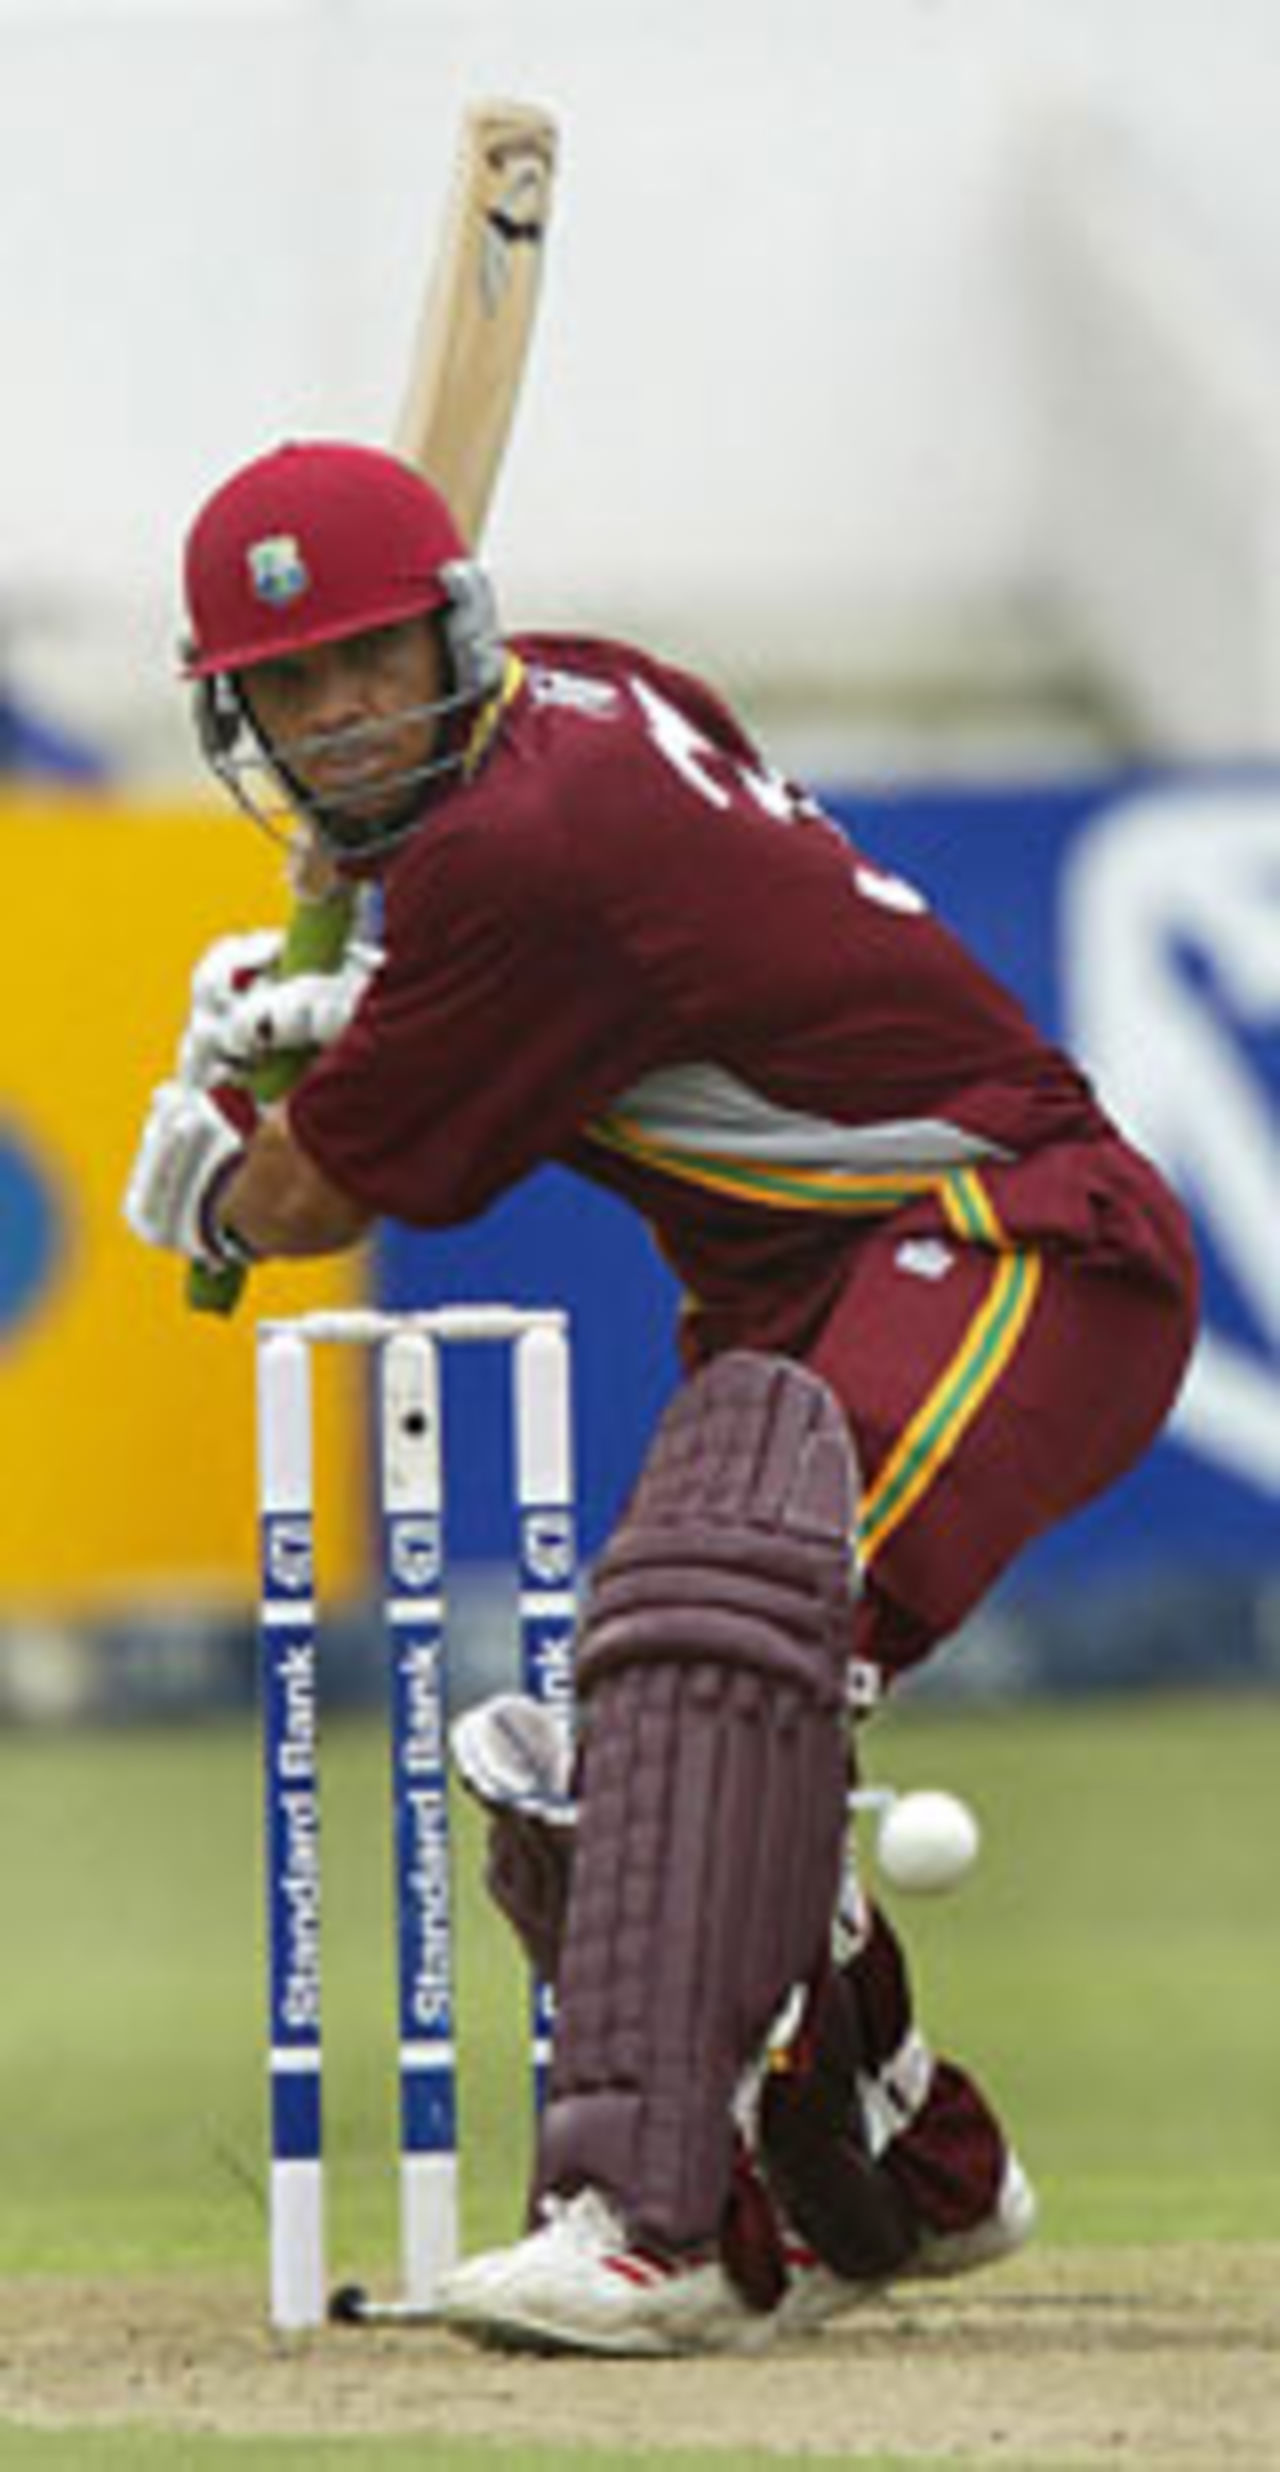 Ricardo Powell on the attack, South Africa v West Indies, 3rd ODI, Durban, January 30, 2004